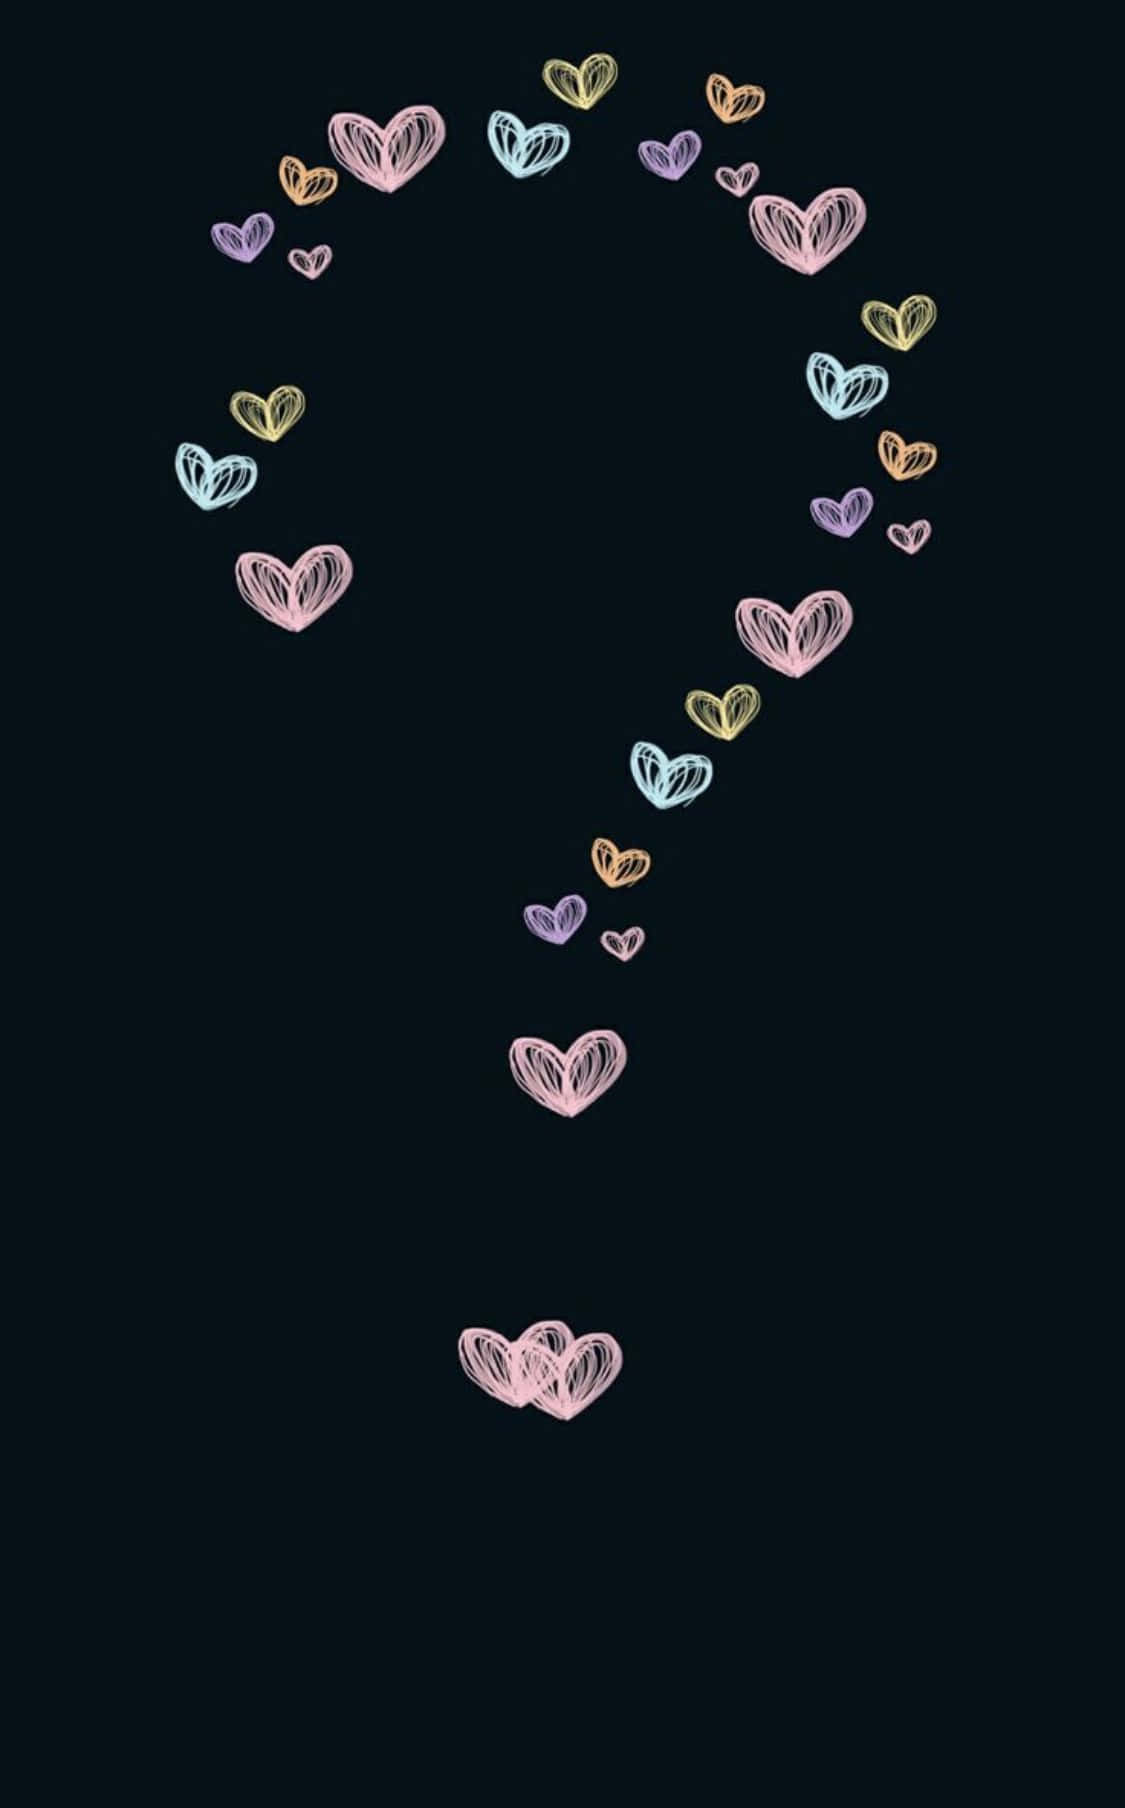 A Black Background With Hearts In The Shape Of A Question Mark